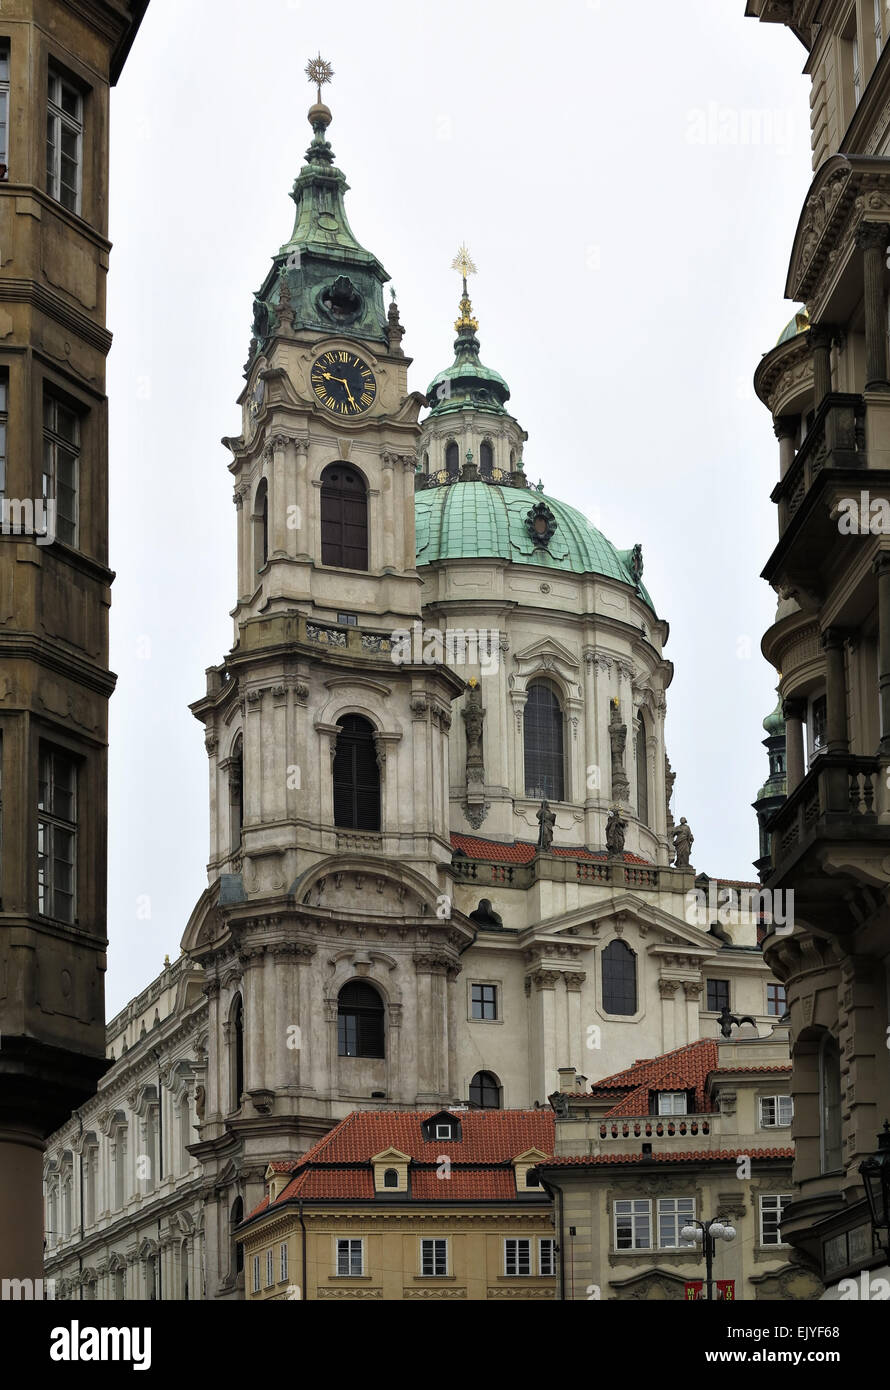 St Nikolas church, one of the most important buildings of baroque Prague Stock Photo